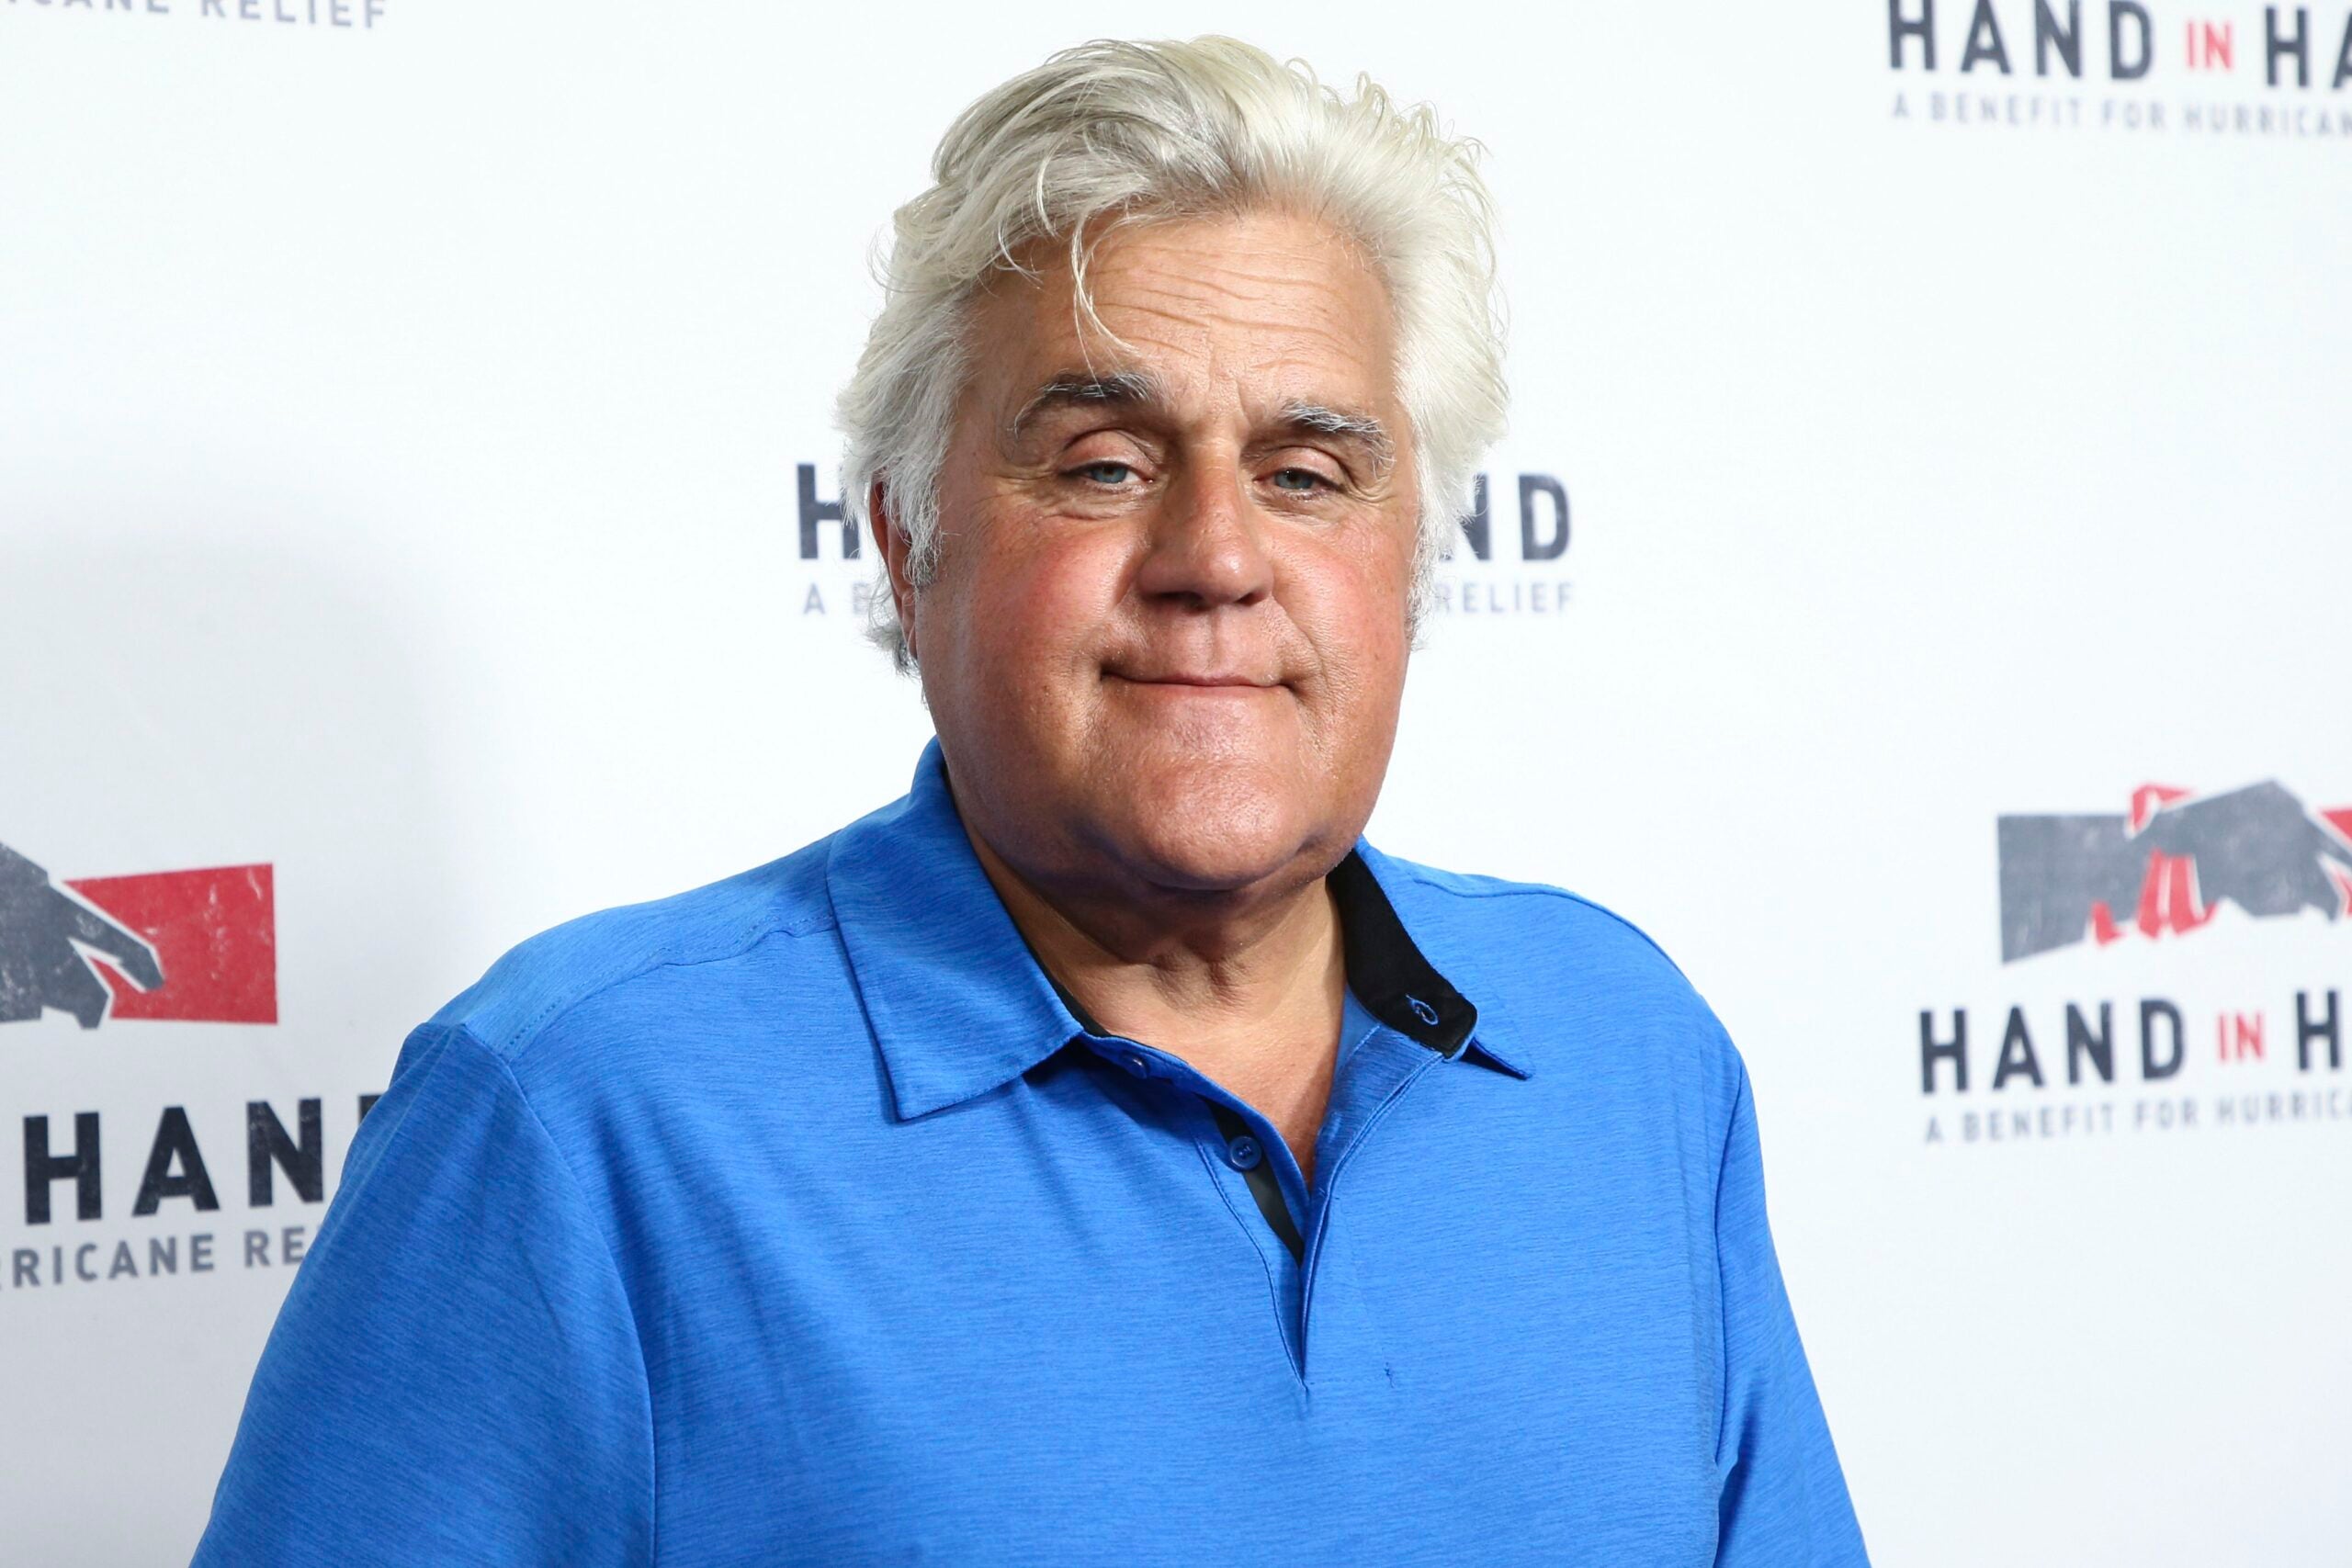 Jay Leno at an event in 2017.